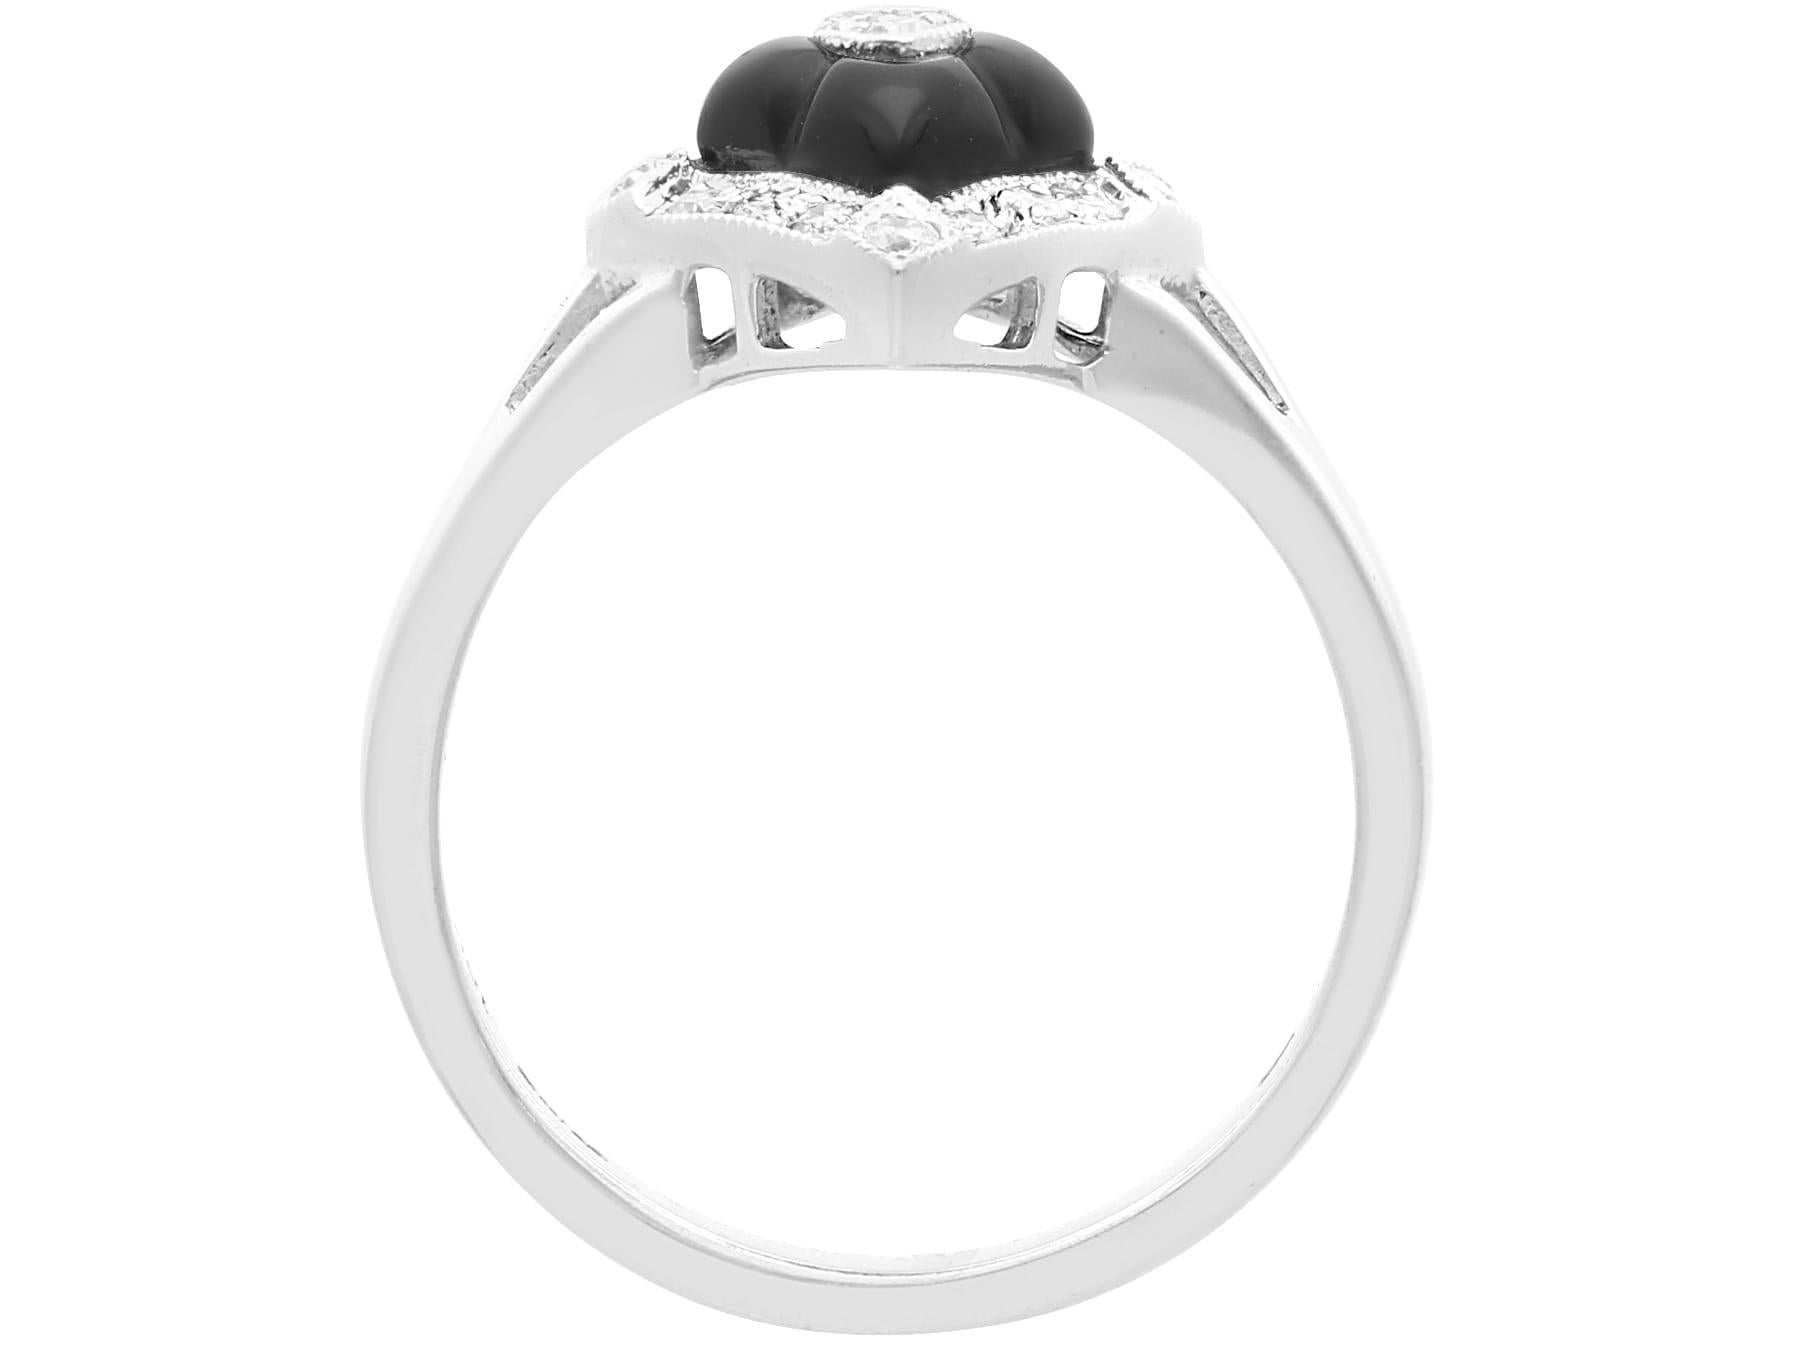 Vintage 1.1 Carat Black Onyx and 0.24 Carat Diamond 18k White Gold Ring  In Excellent Condition For Sale In Jesmond, Newcastle Upon Tyne